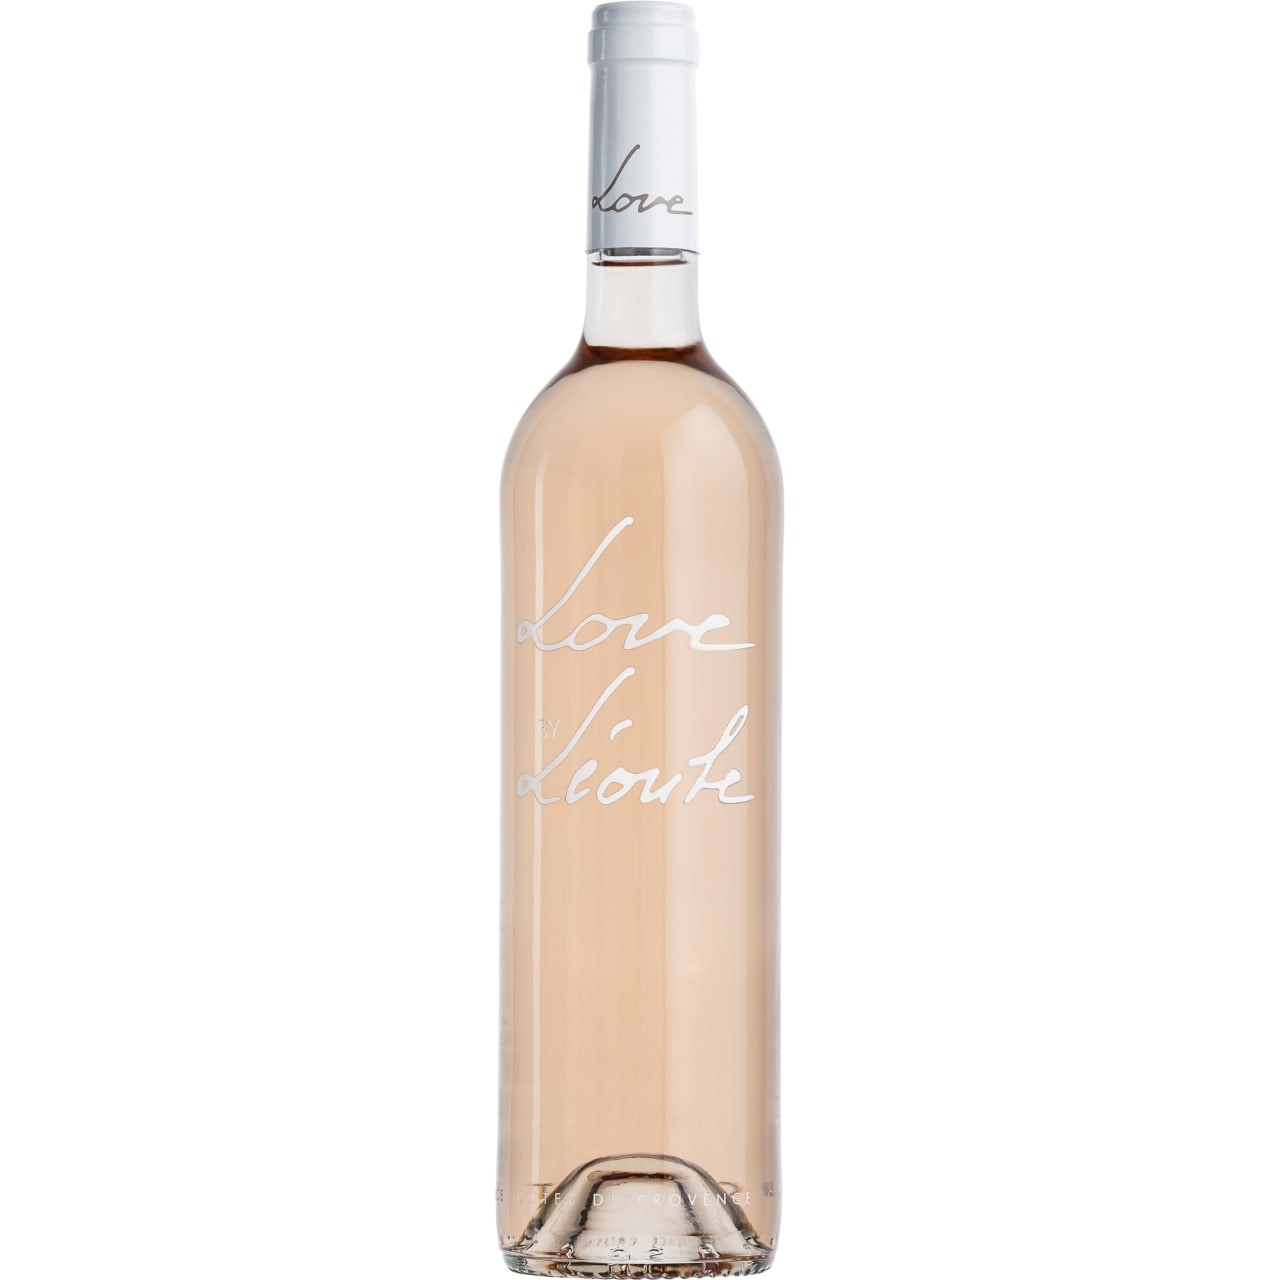 A blend of traditional red grape varieties from Provence. A fruit forward rosé, with a lovely freshness and round mouthfeel.